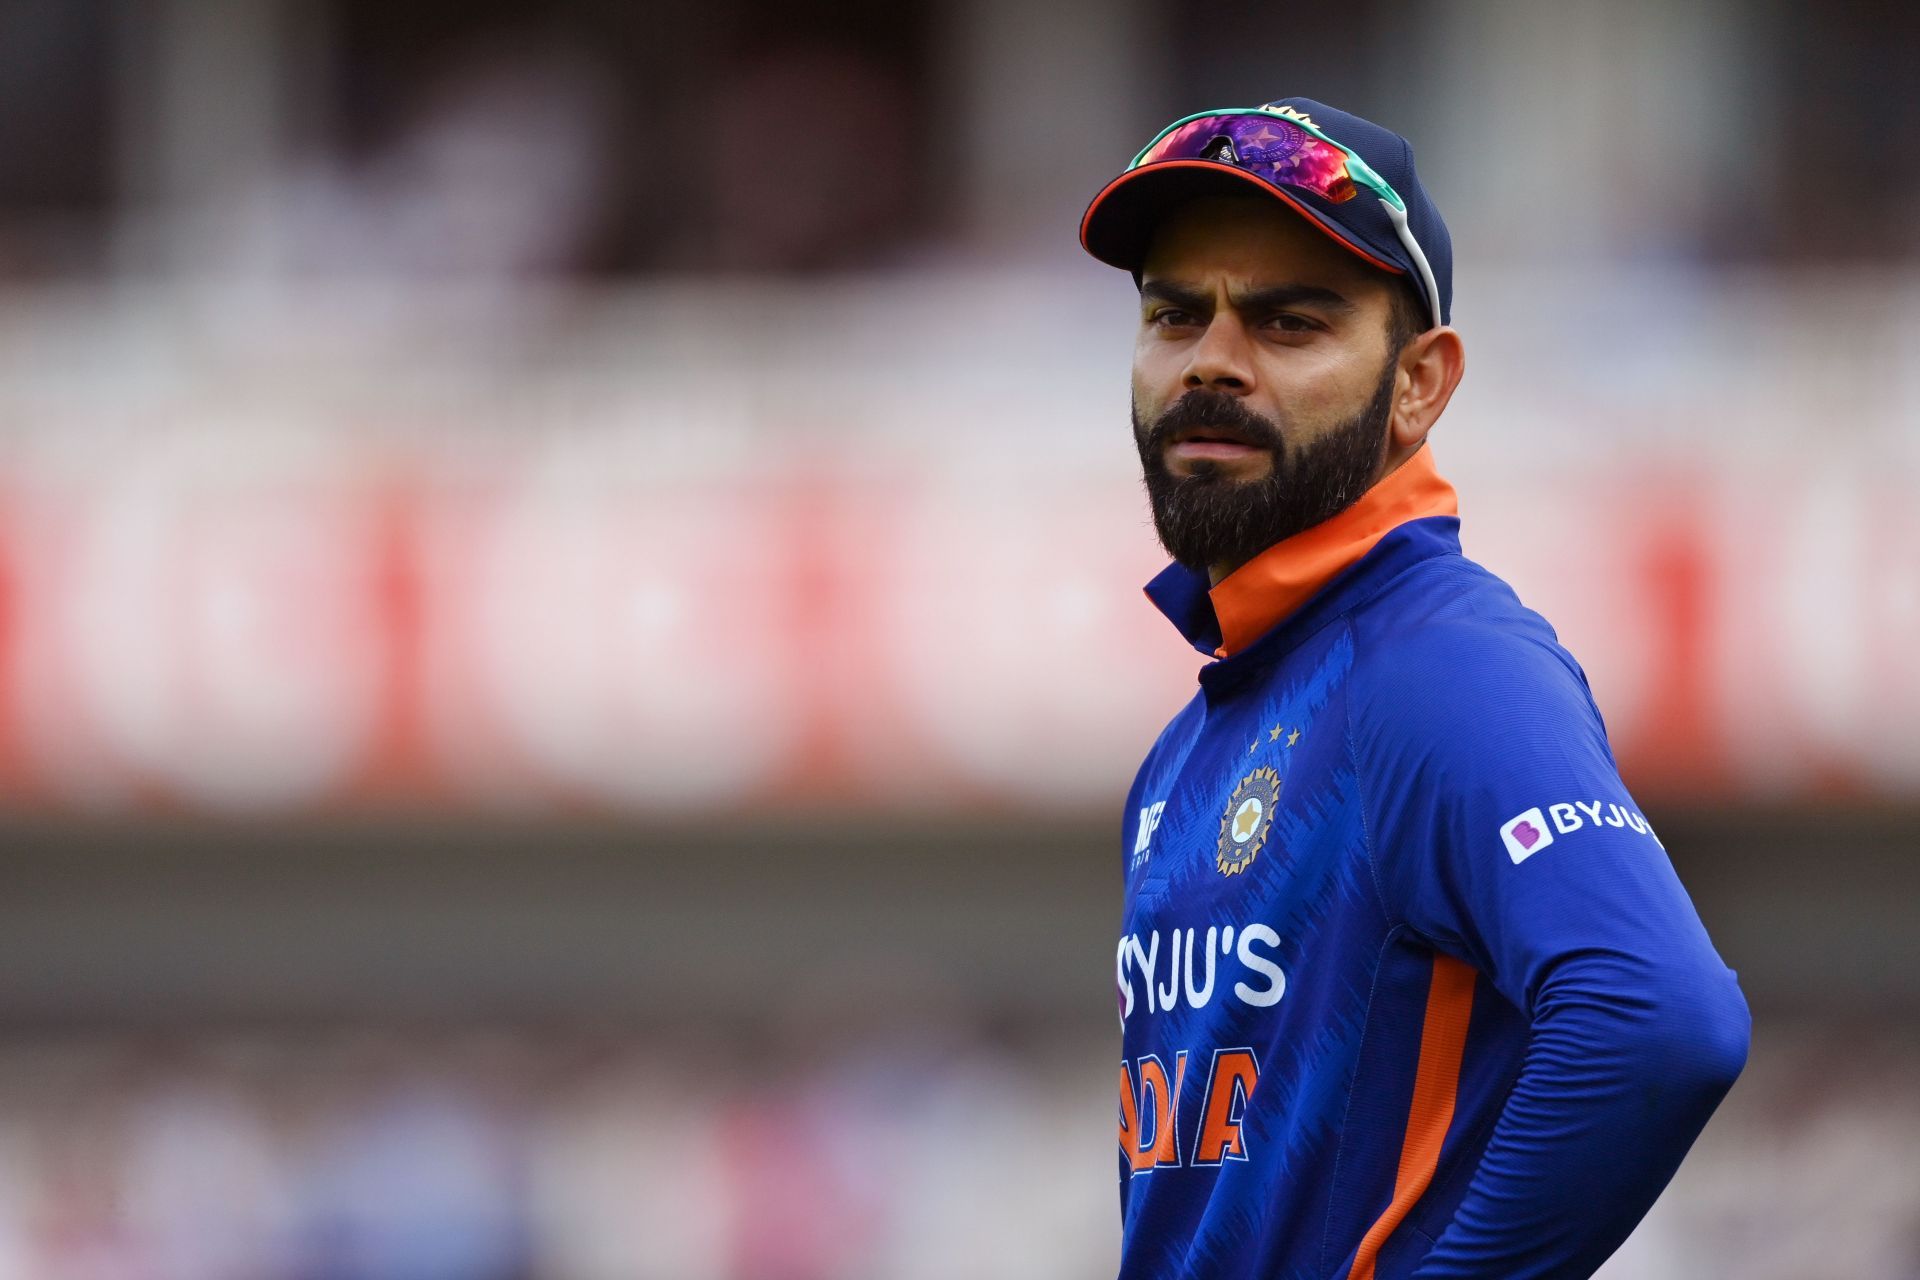 Virat Kohli will be under pressure to perform for India in Asia Cup